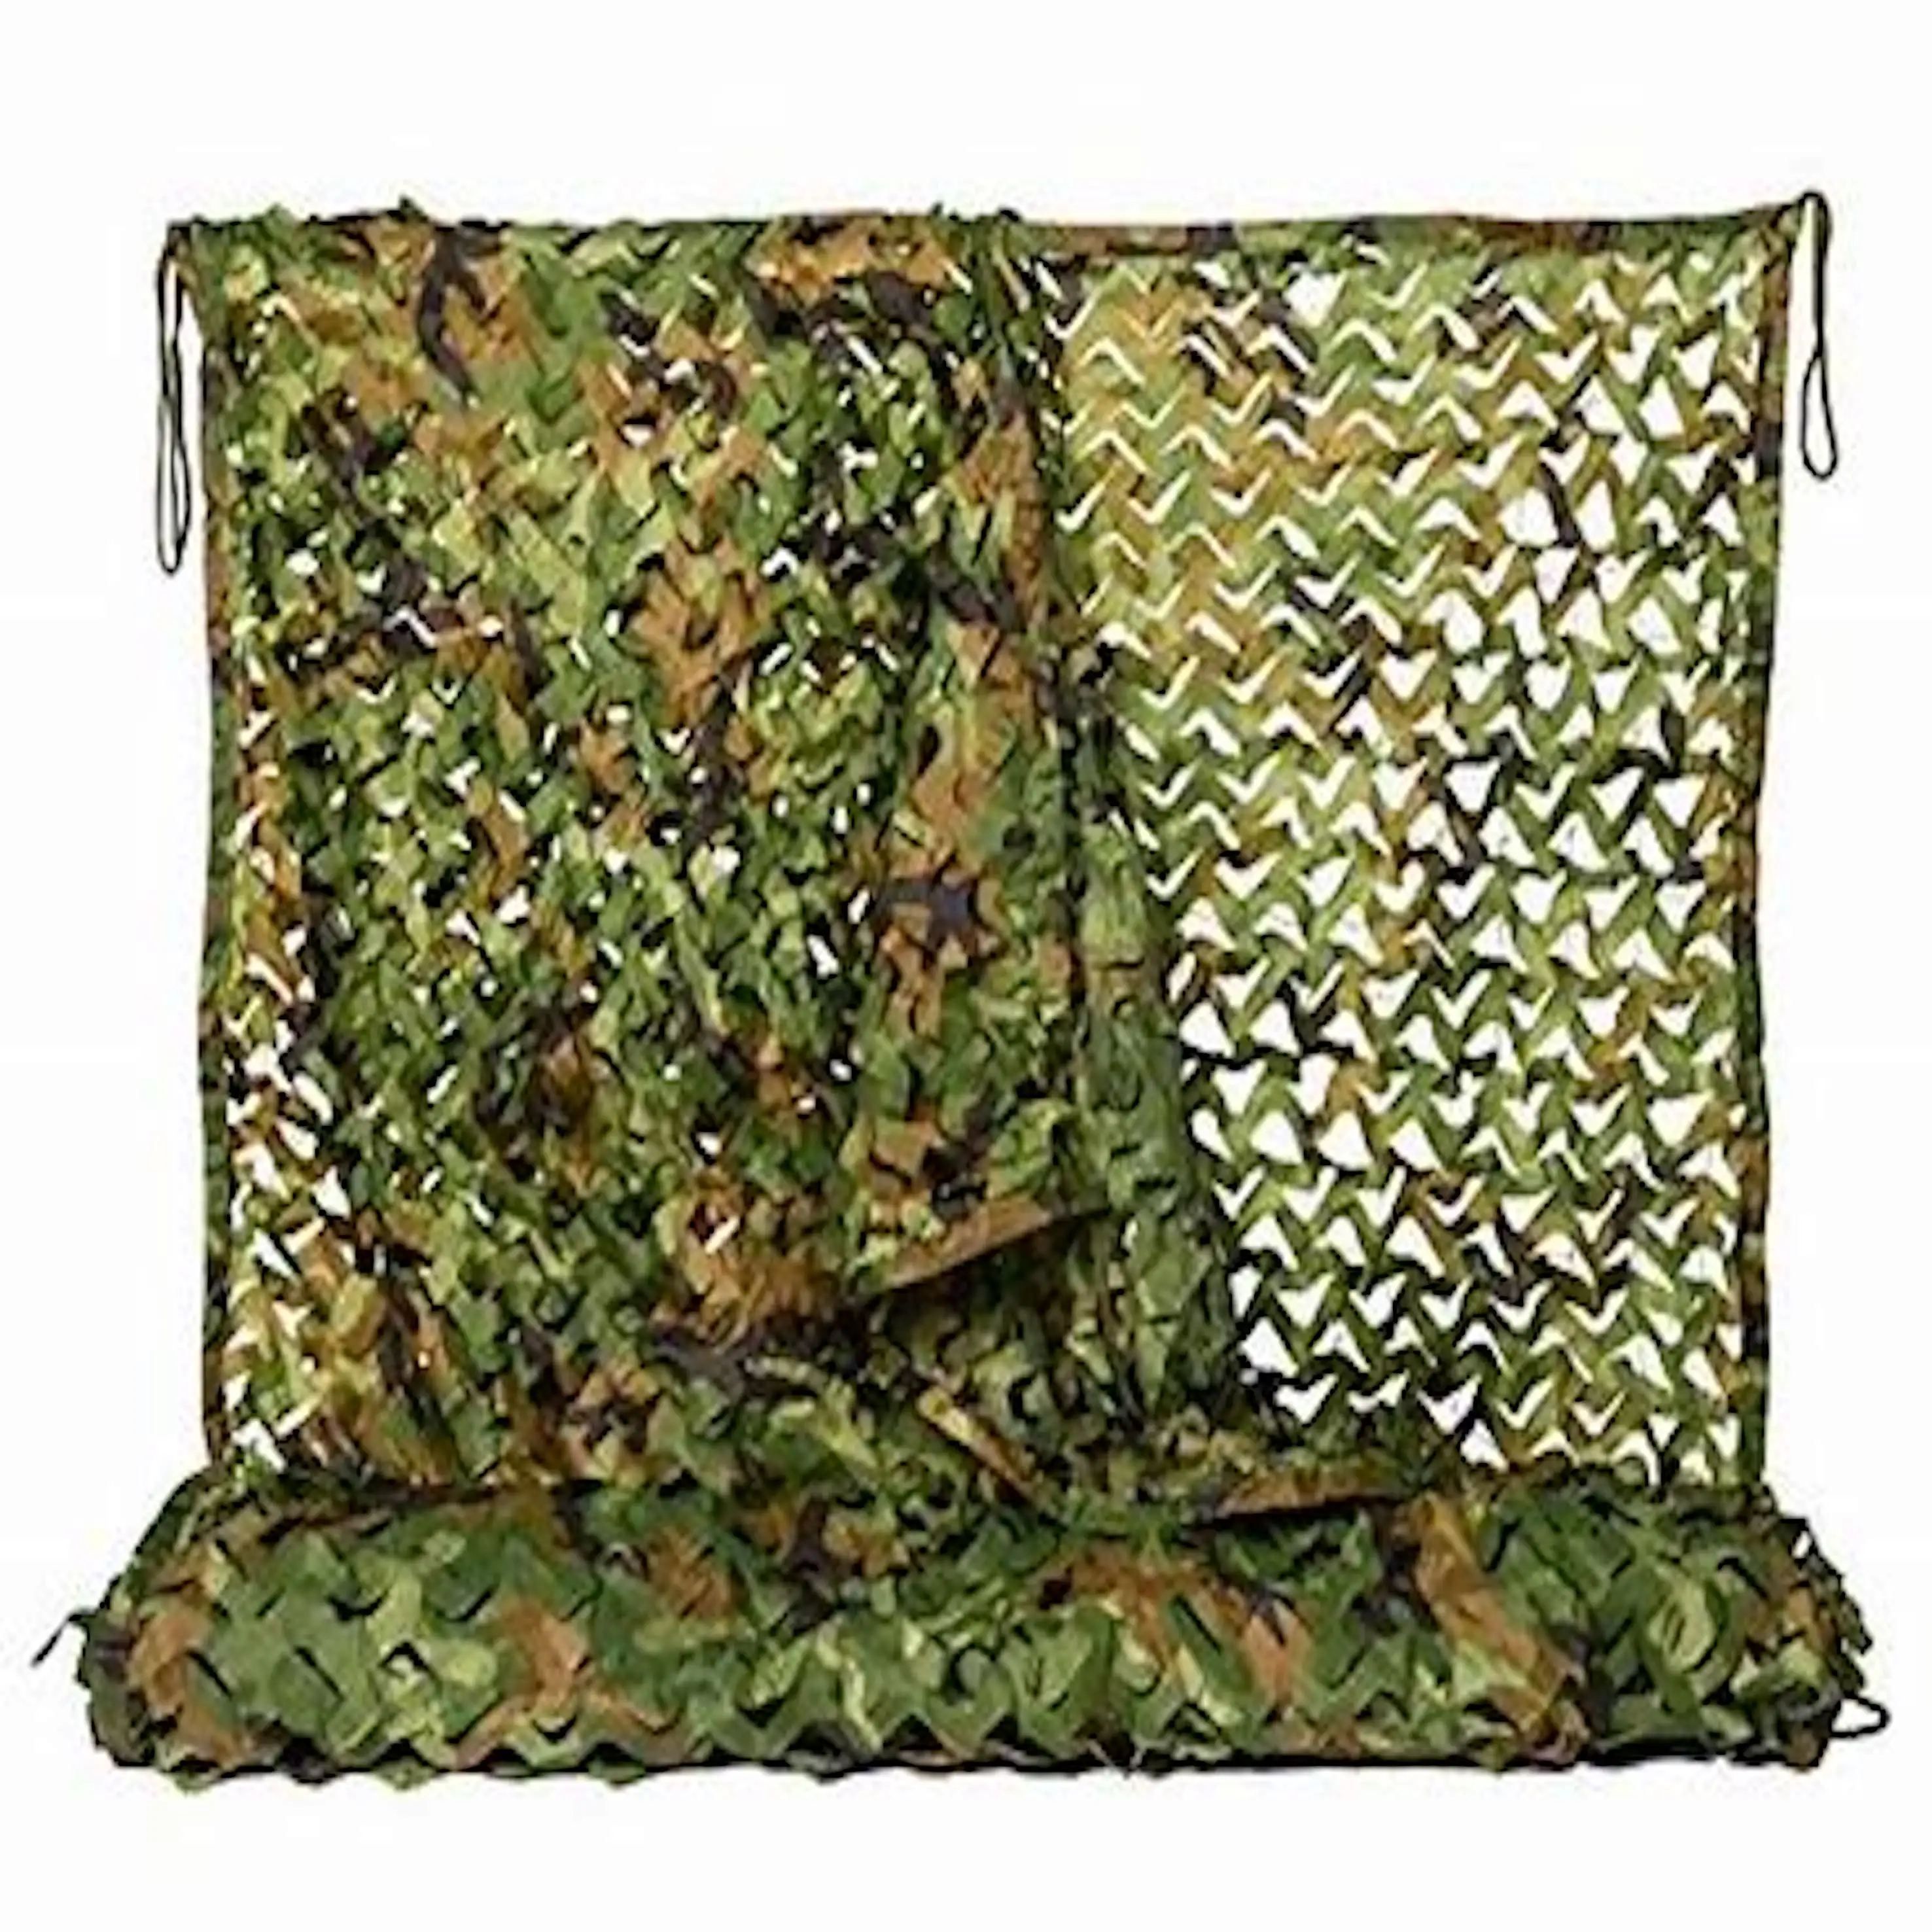 1.5x3m /2x10m Hunting Militaiy Camouflage Nets Woodland Armiy training Camo netting Car Covers Tent Shade Camping Sun Shelter